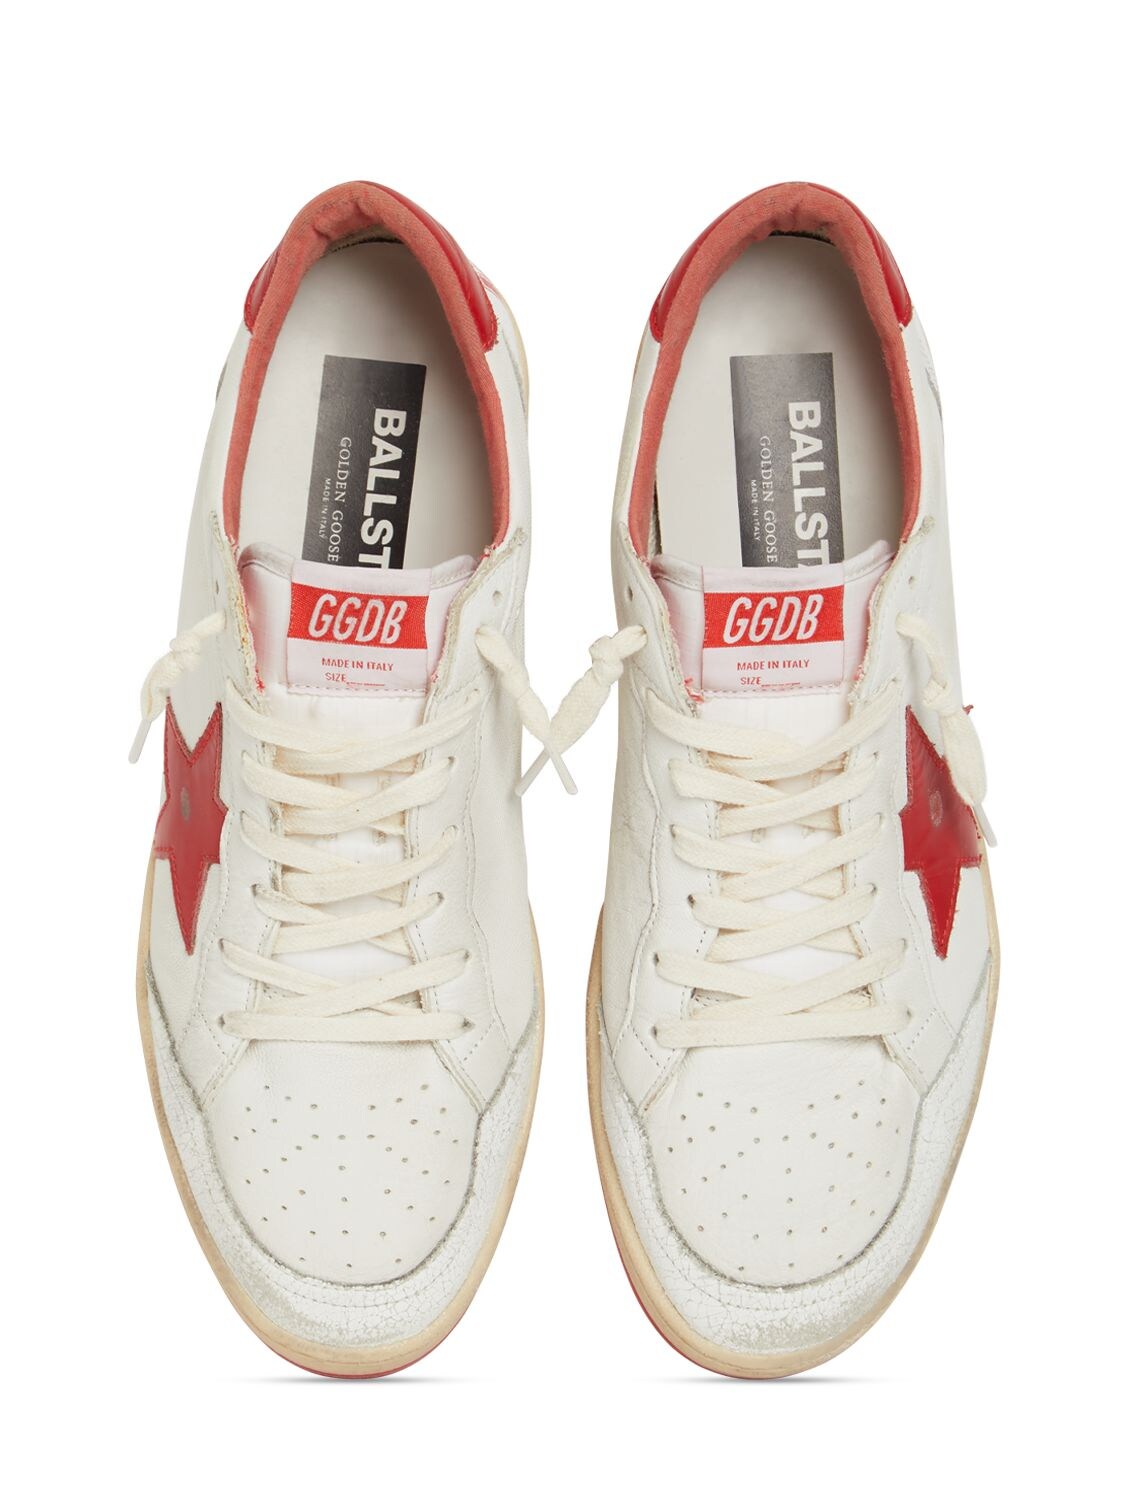 Shop Golden Goose Ball Star Nappa Leather & Nylon Sneakers In White,red